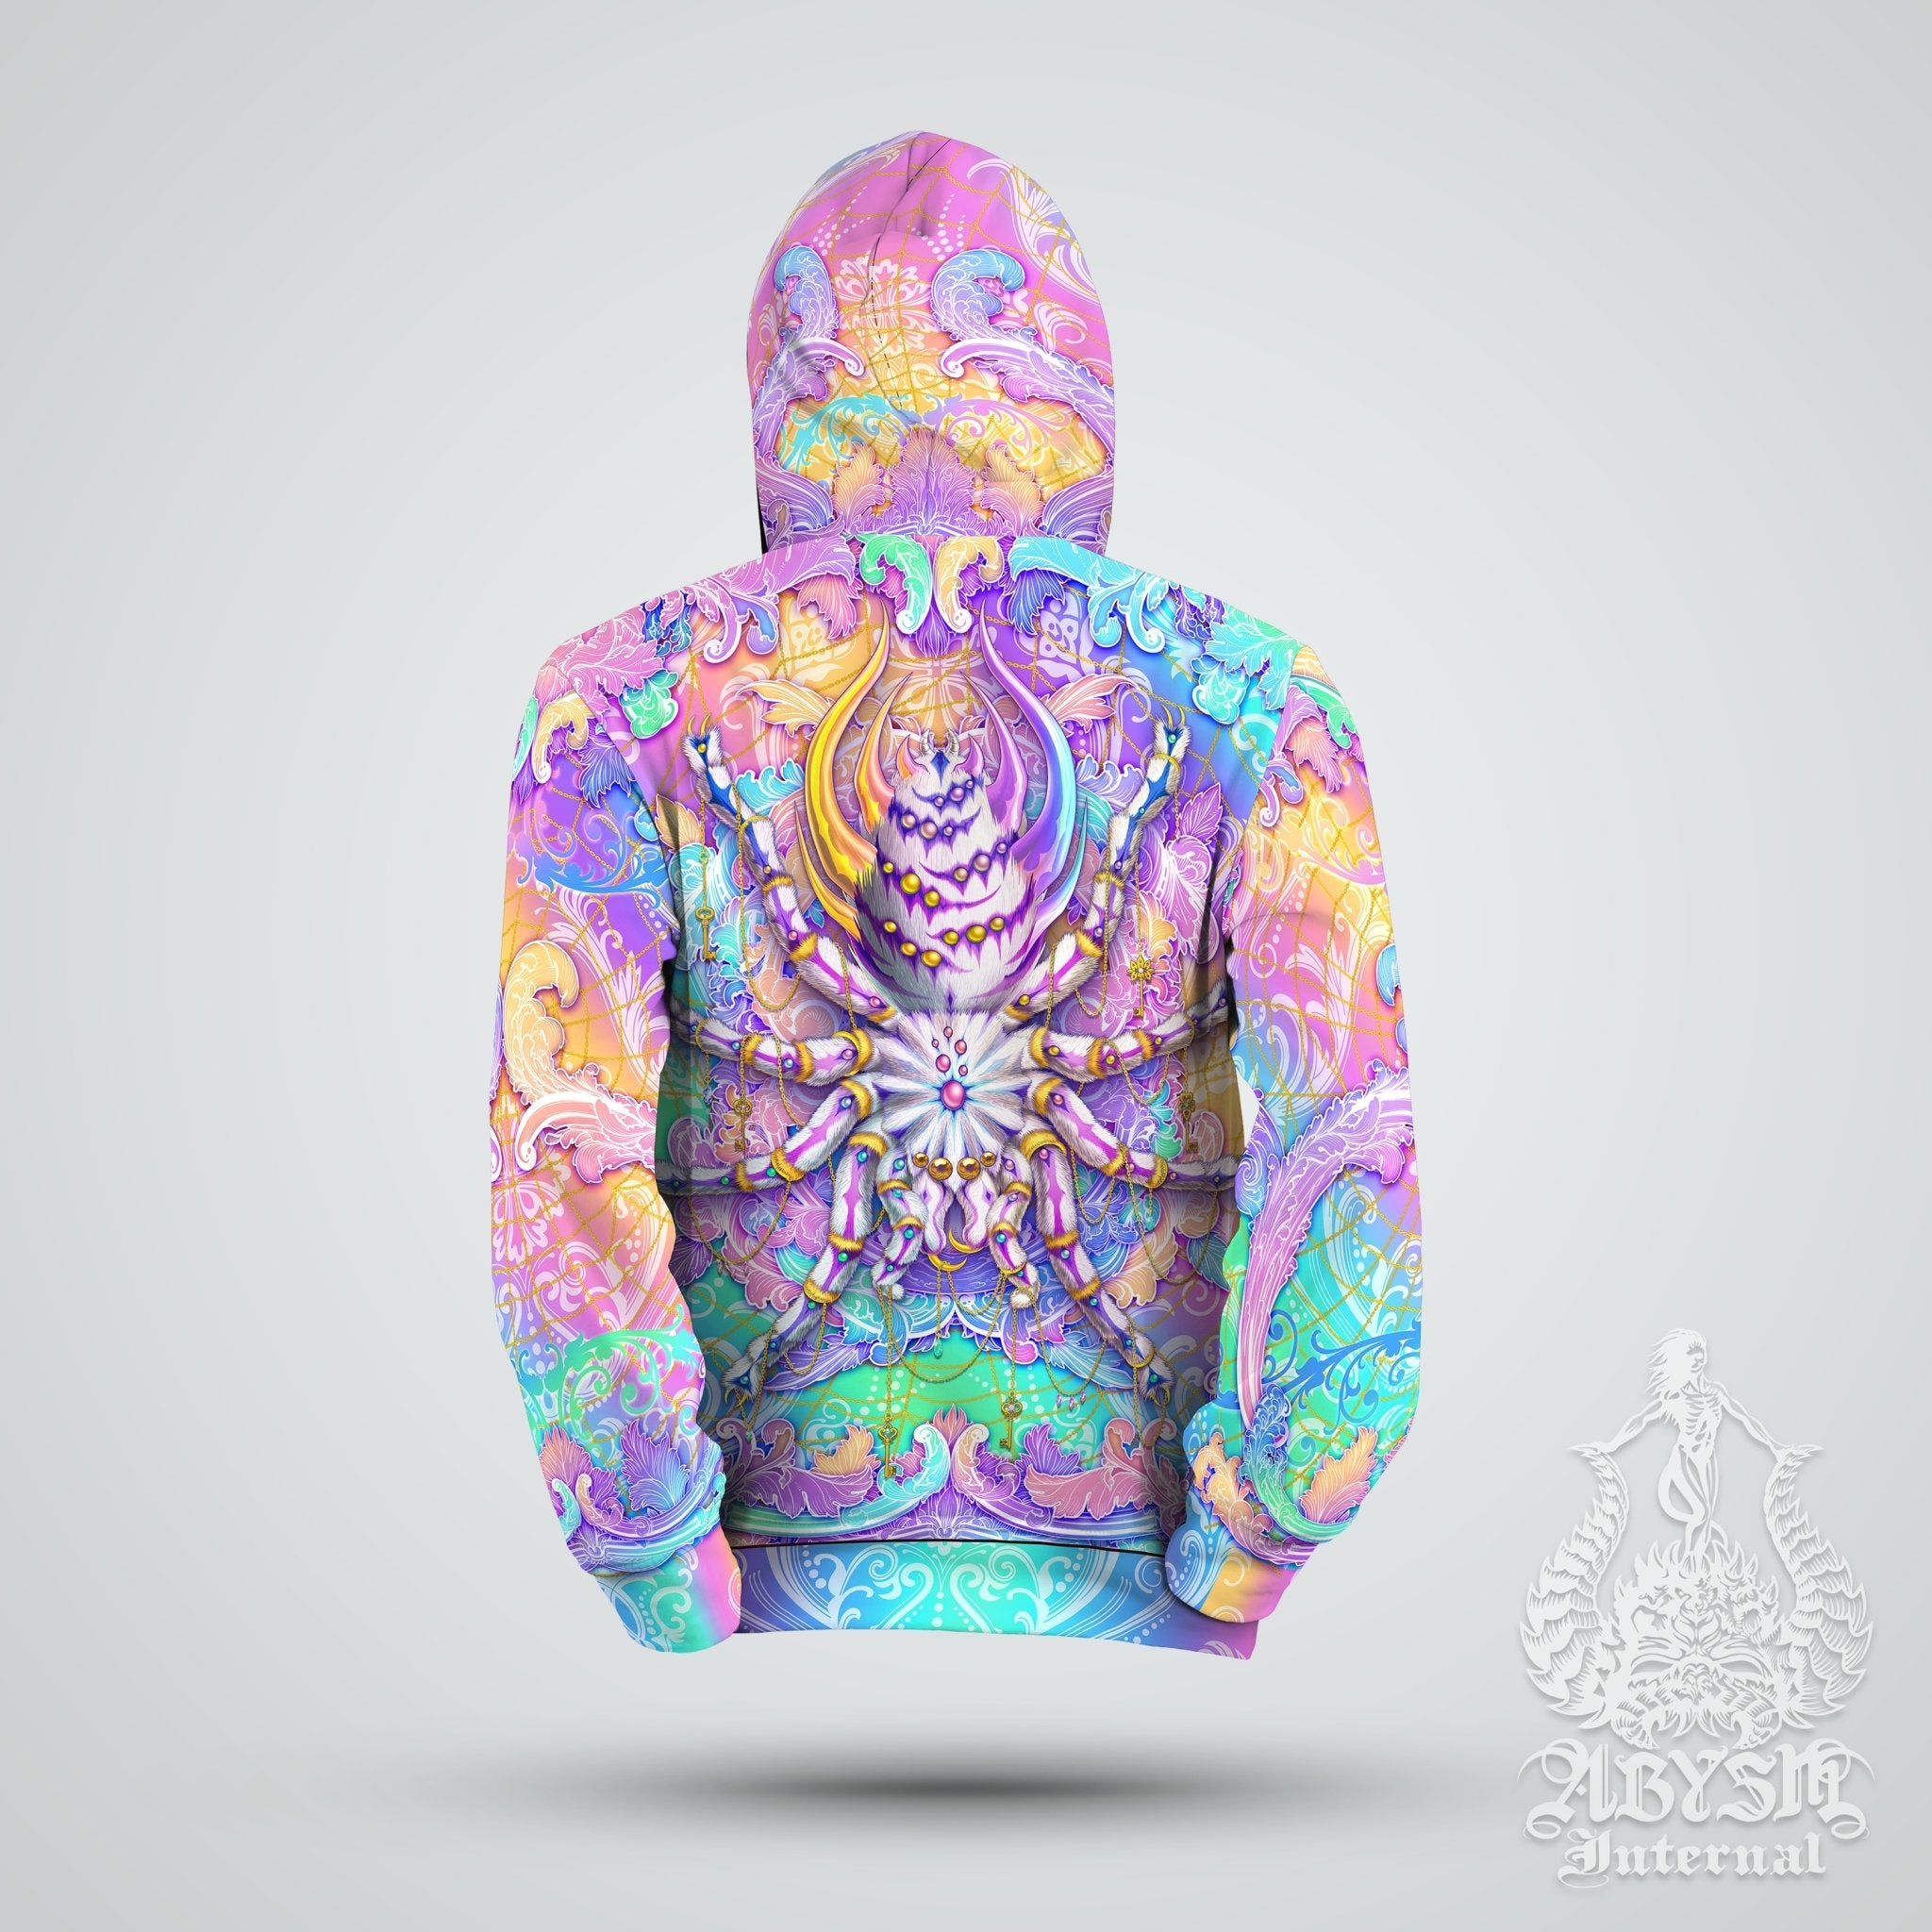 Pastel Hoodie, Aesthetic Streetwear, Skater, Rave Outfit, Festival Apparel, Holographic Clothing, Unisex - Tarantula, Spider, Psychedelic Art - Abysm Internal